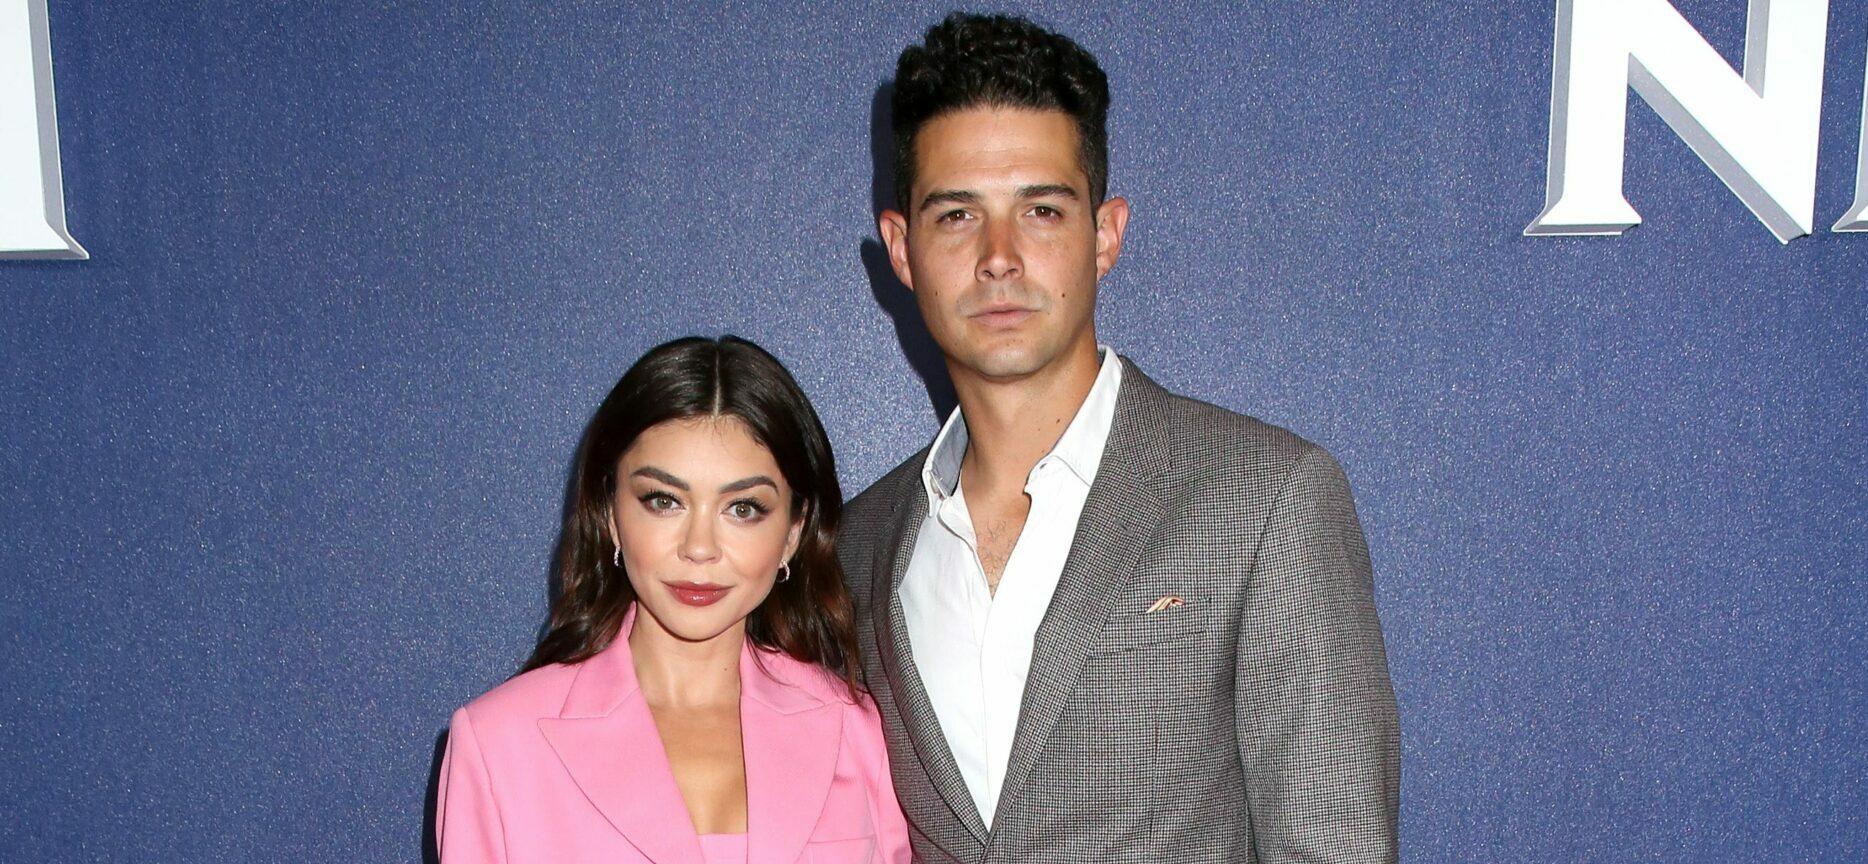 NBCUniversal 2022 Upfront held at The Mandarin Oriental Hotel on May 16, 2022 in New York City, NY ©Steven Bergman/AFF-USA.COM. 16 May 2022 Pictured: Sarah Hyland and Wells Adams.